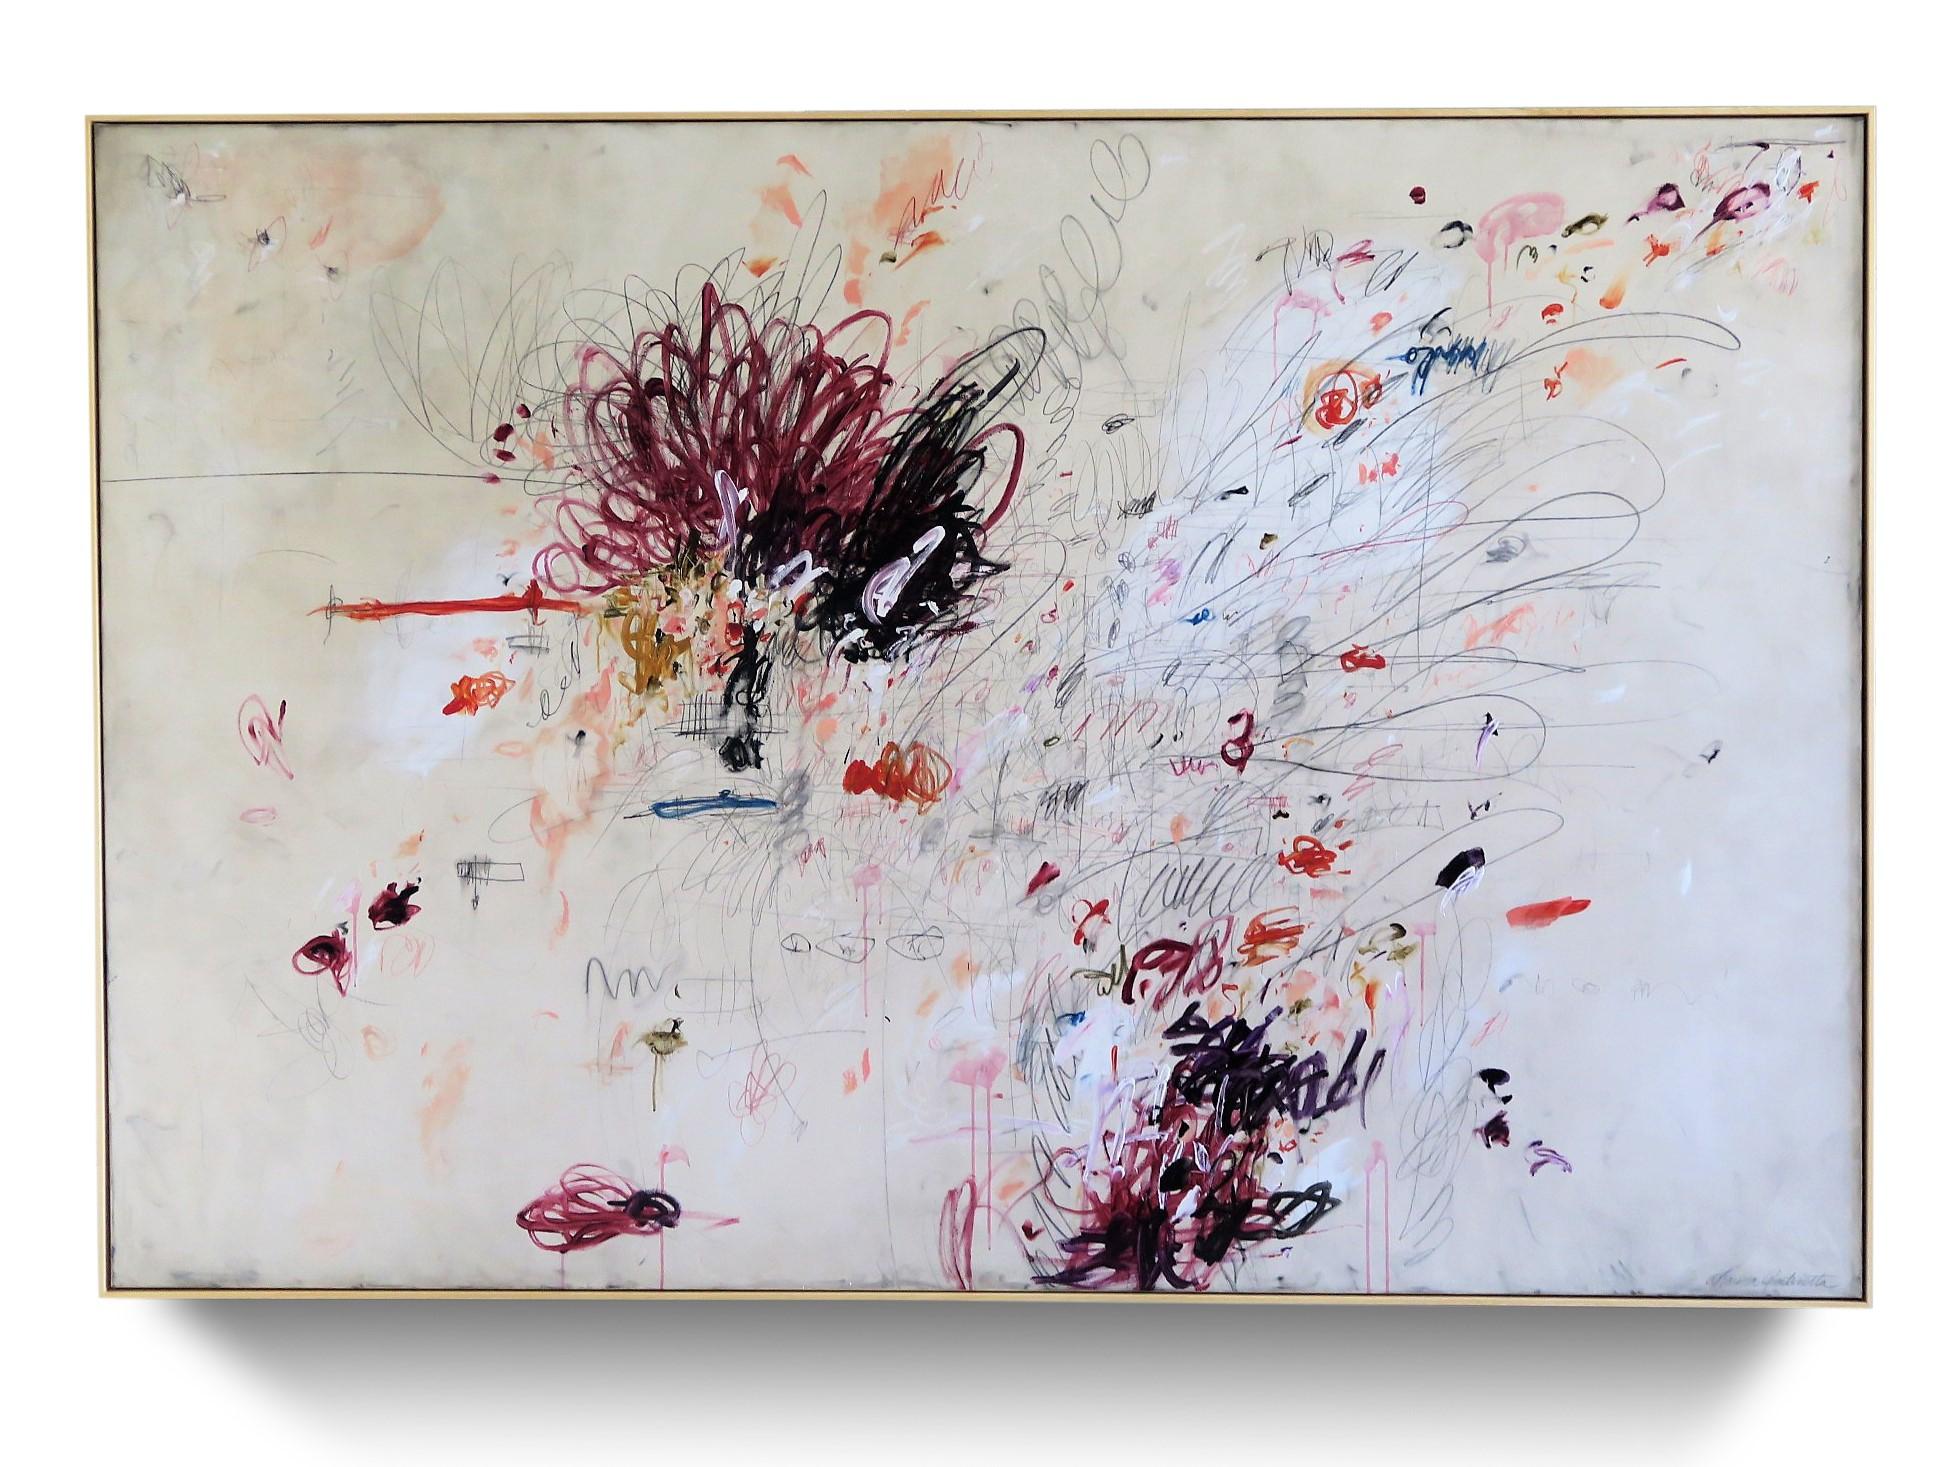 "Beautiful Mischief" Abstract Acrylic, Oil Pastels and Pencil Painting, 72"x108" - Mixed Media Art by Karina Gentinetta